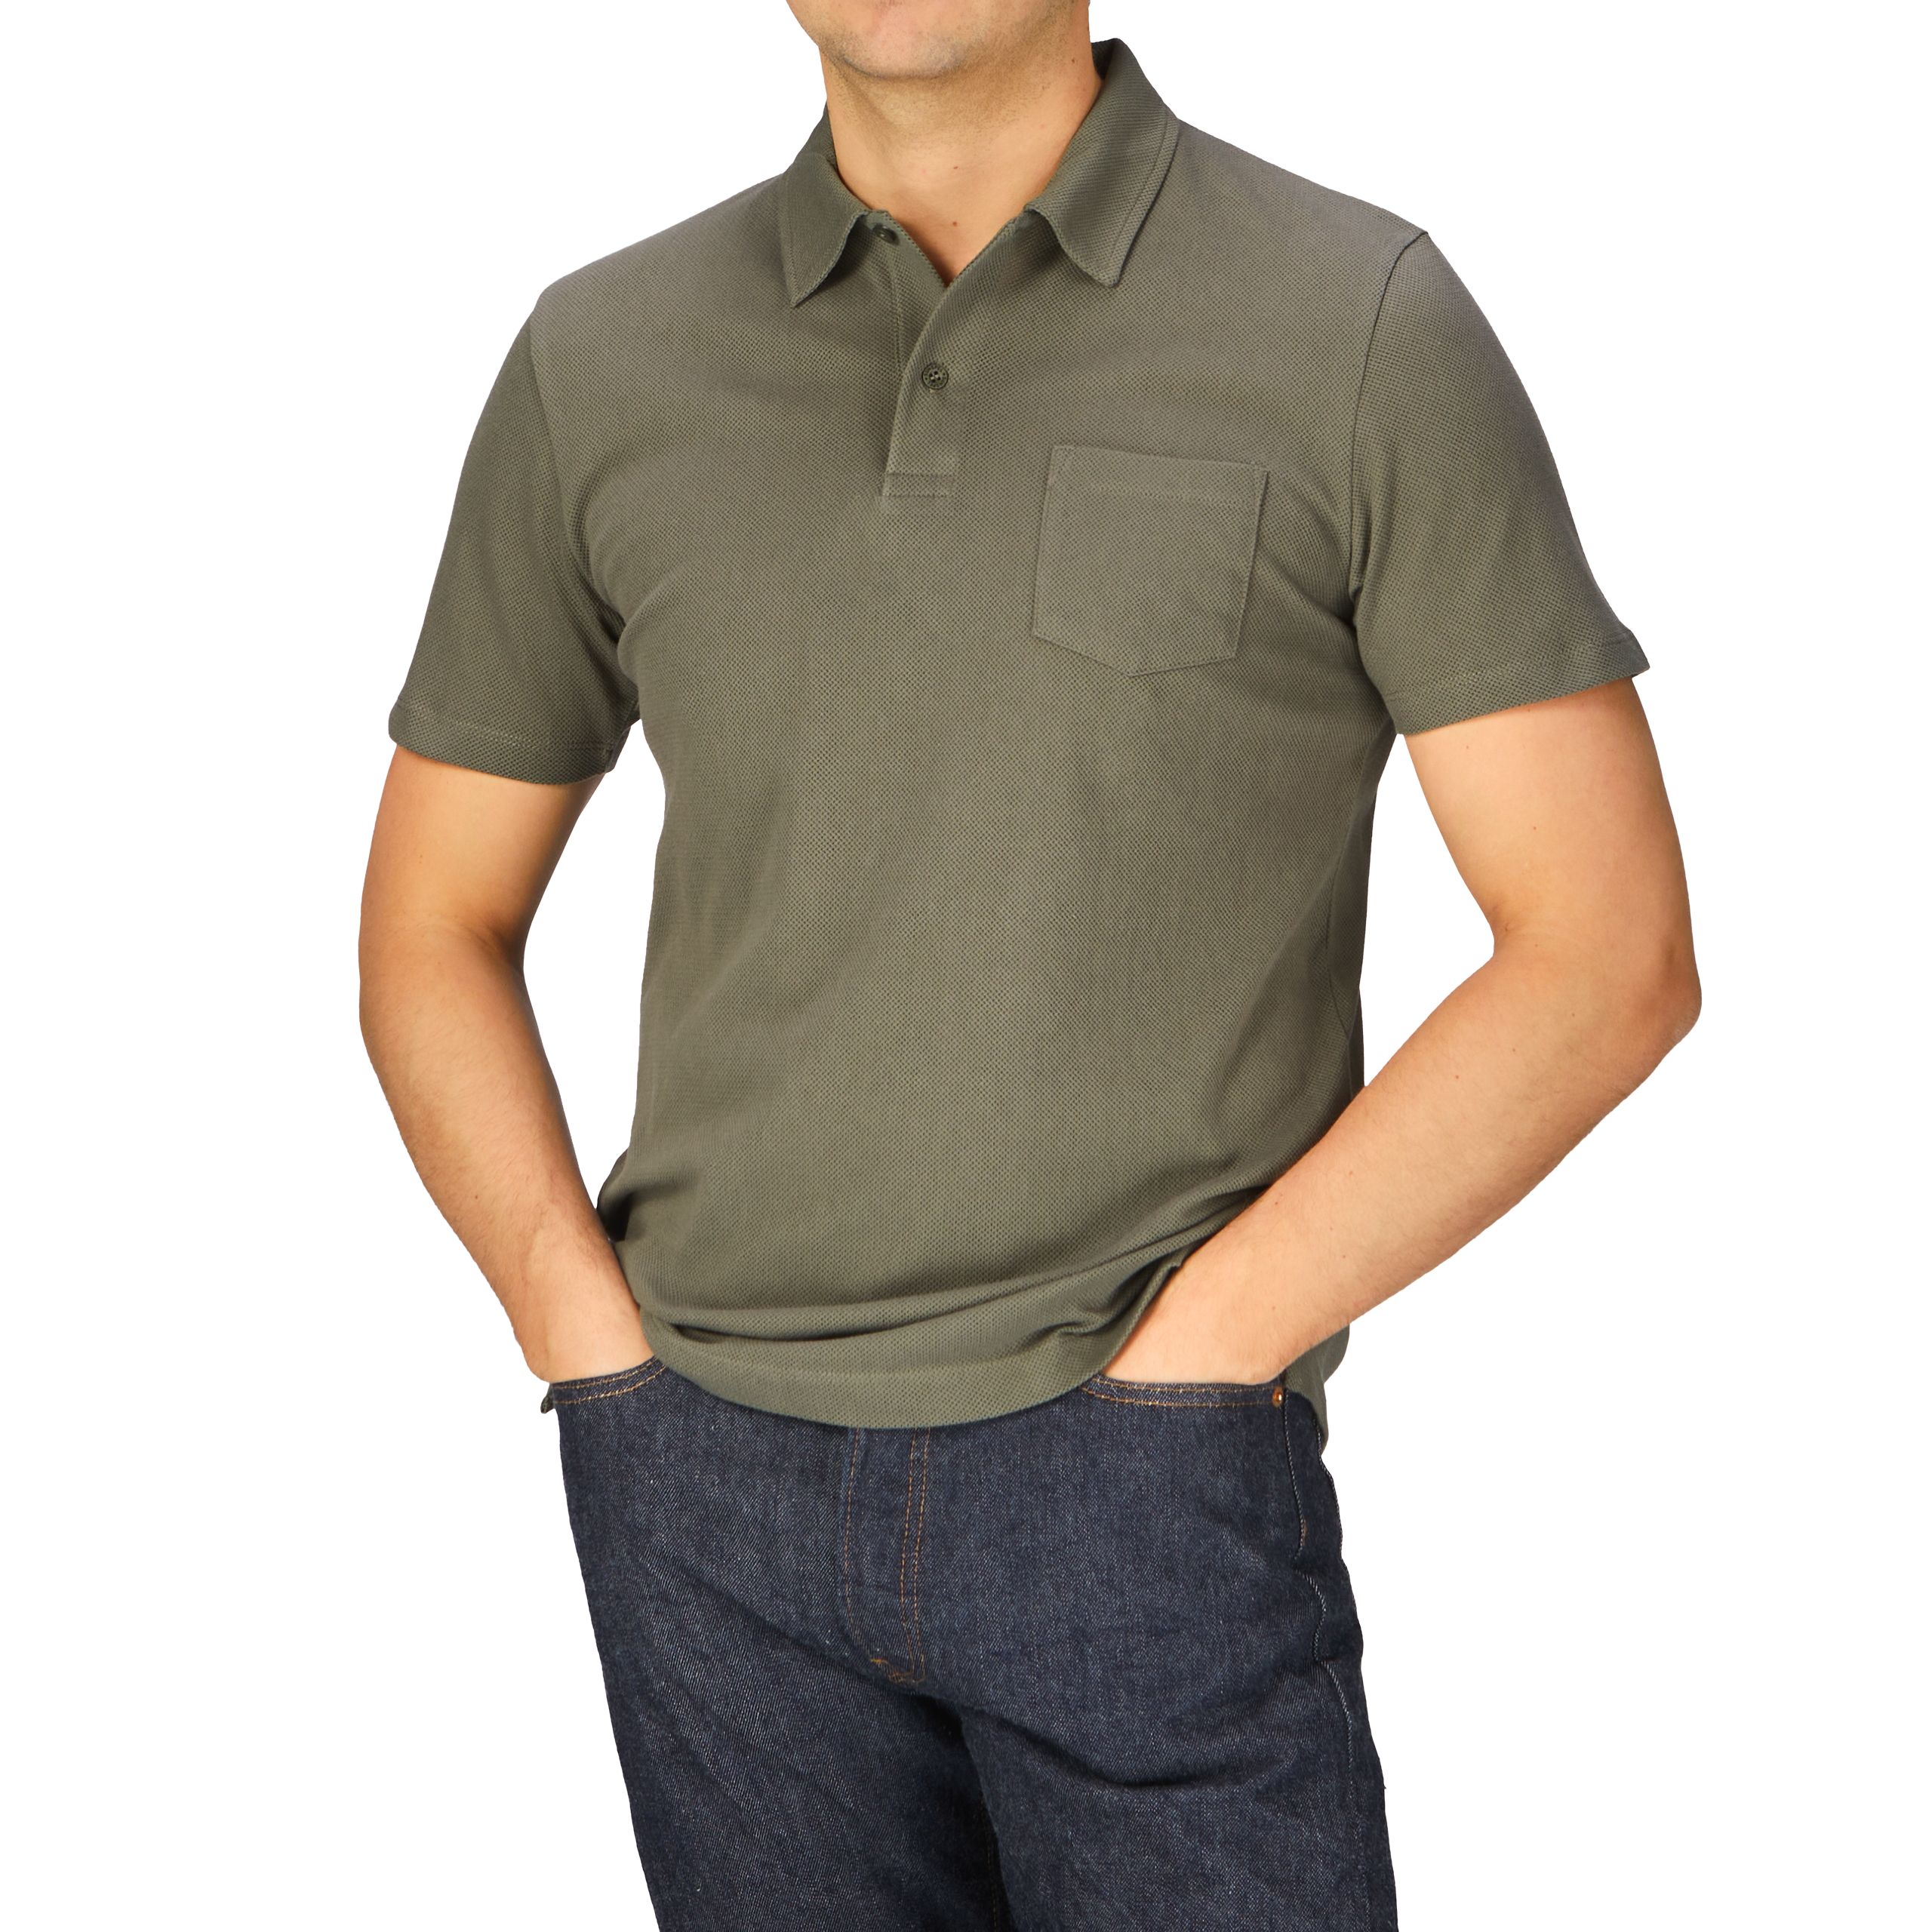 A man wearing a Khaki Green Cotton Riviera Polo Shirt by Sunspel and jeans.